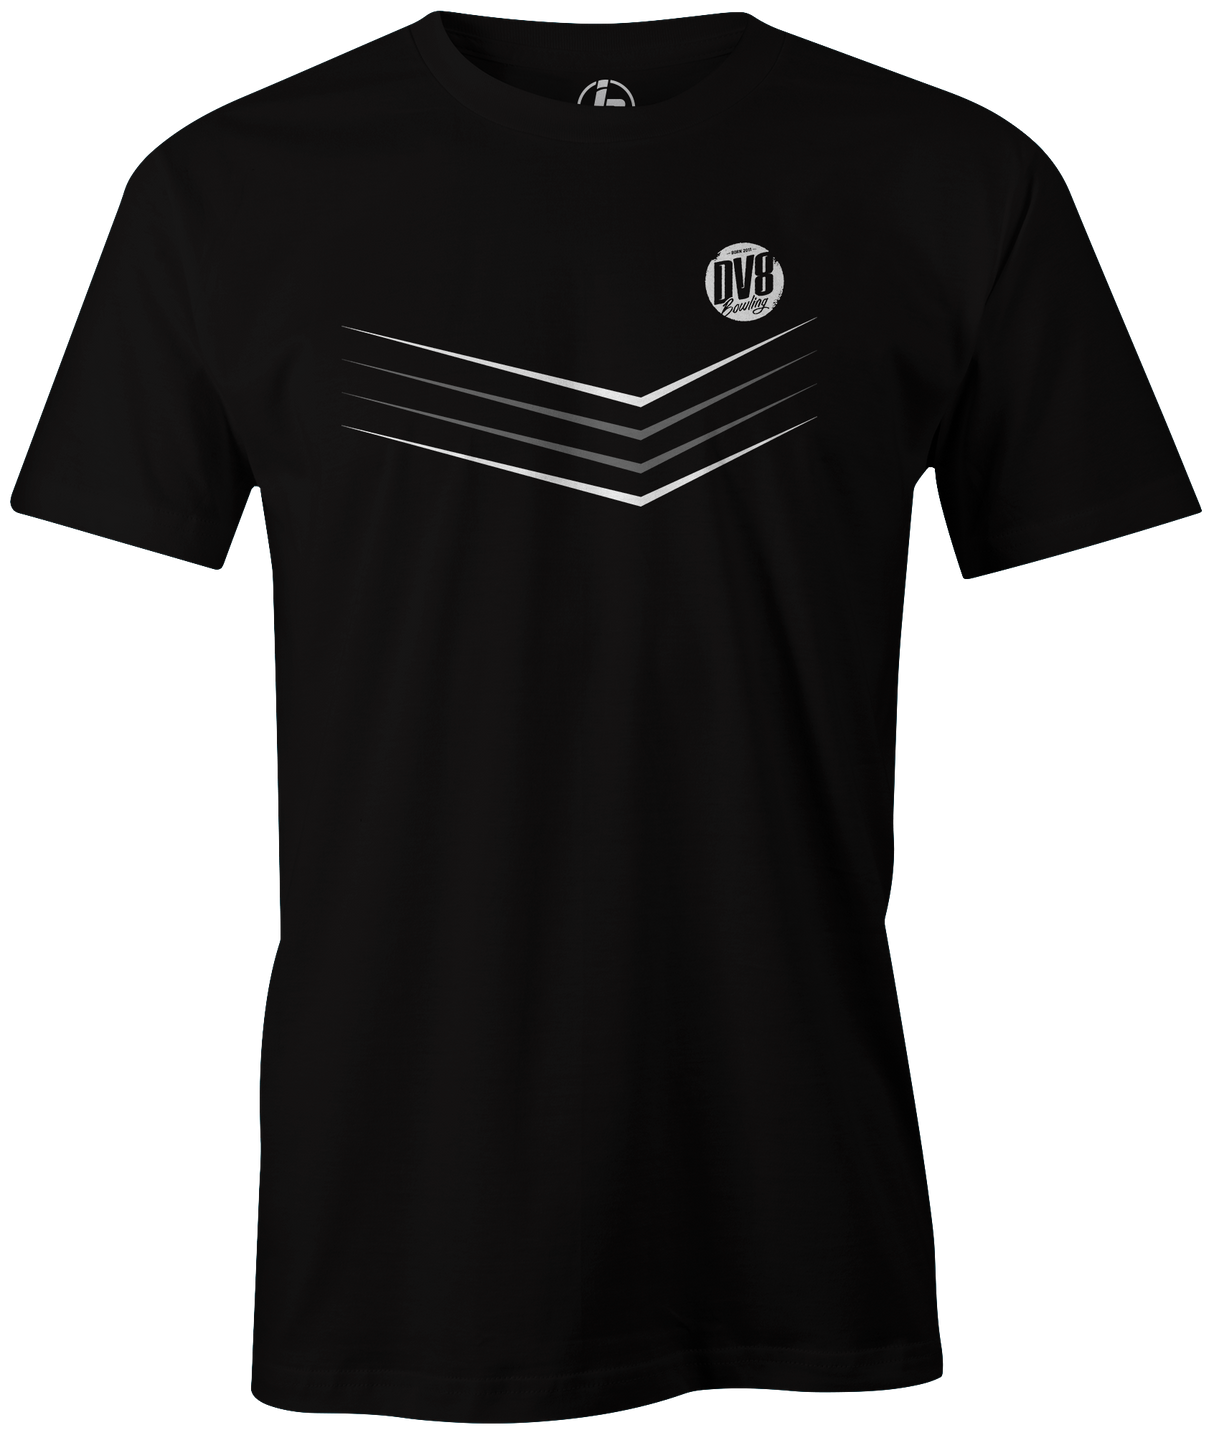 DV8 Sport! This new tee is the perfect shirt for any DV8 bowling fan. Available in multiple colors.  Hit the lanes in this awesome t-shirt and show everyone that you are a part of the team!  Tshirt, tee, tee-shirt, tee shirt, Pro shop. League bowling team shirt. PBA. PWBA. USBC. Junior Gold. Youth bowling. Tournament t-shirt. Men's. Bowling Ball.